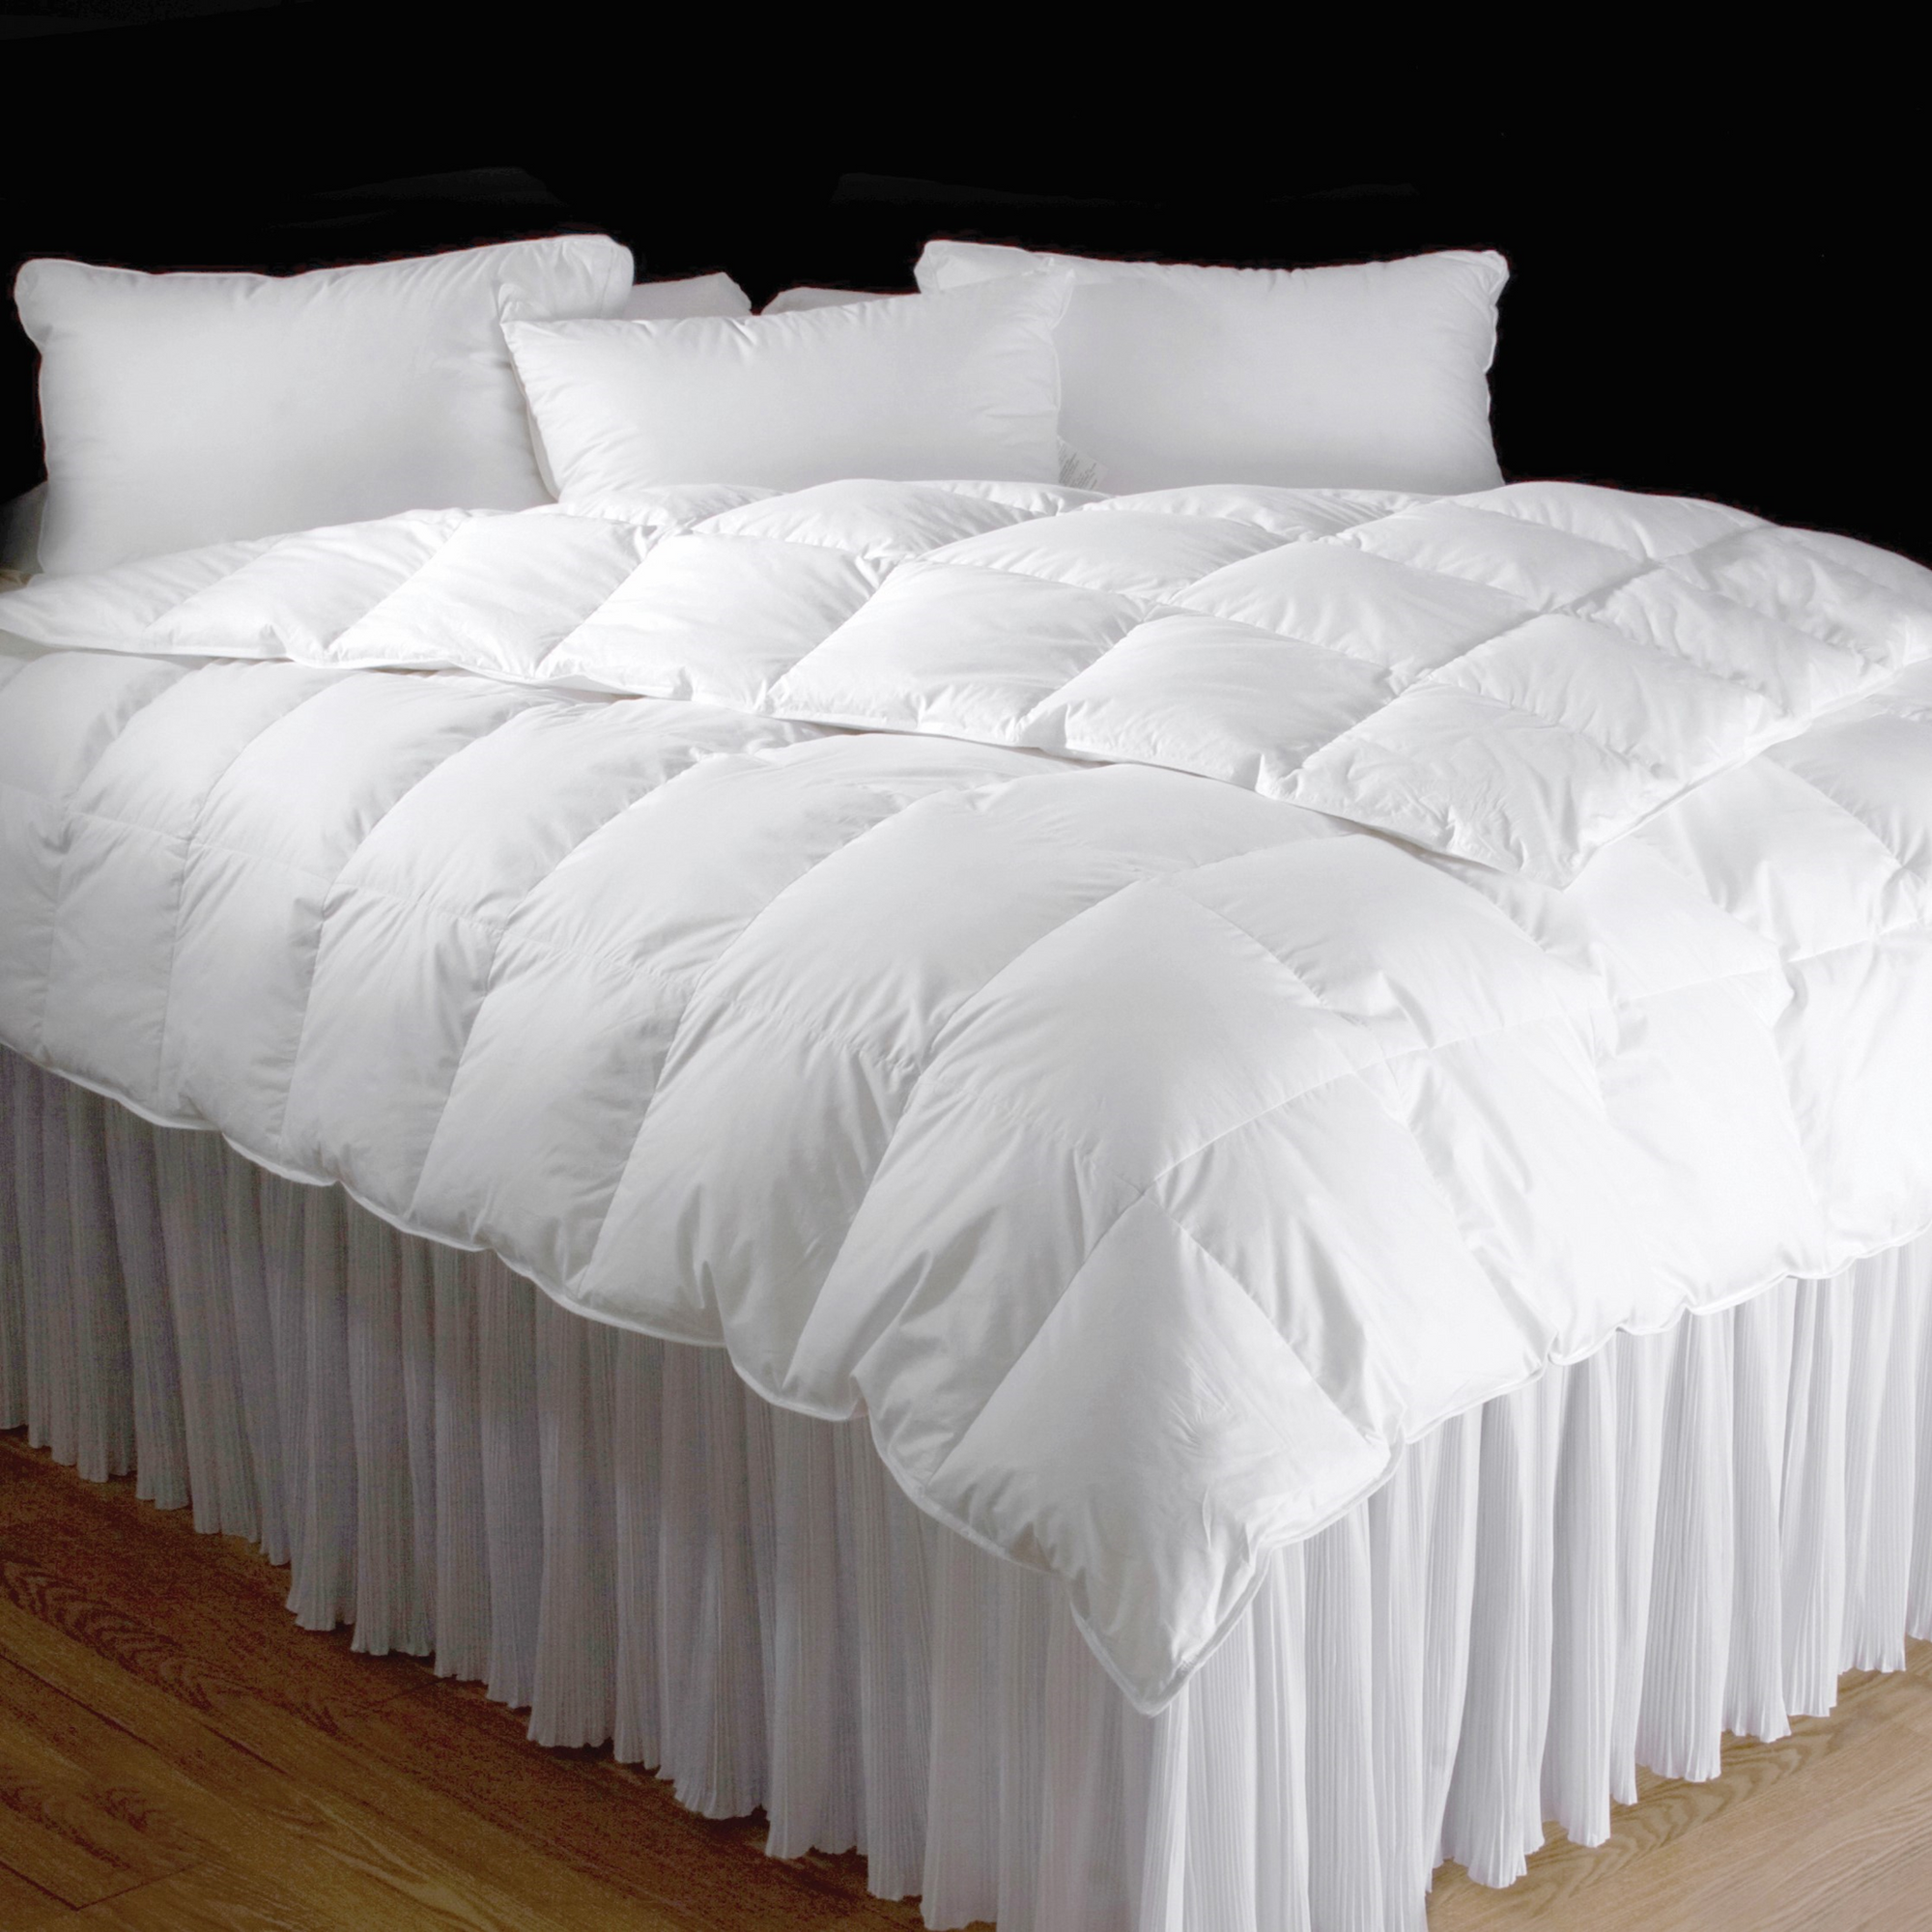 Full View of Downtown Company Calla Lilly Hungarian White Goose Down Comforter